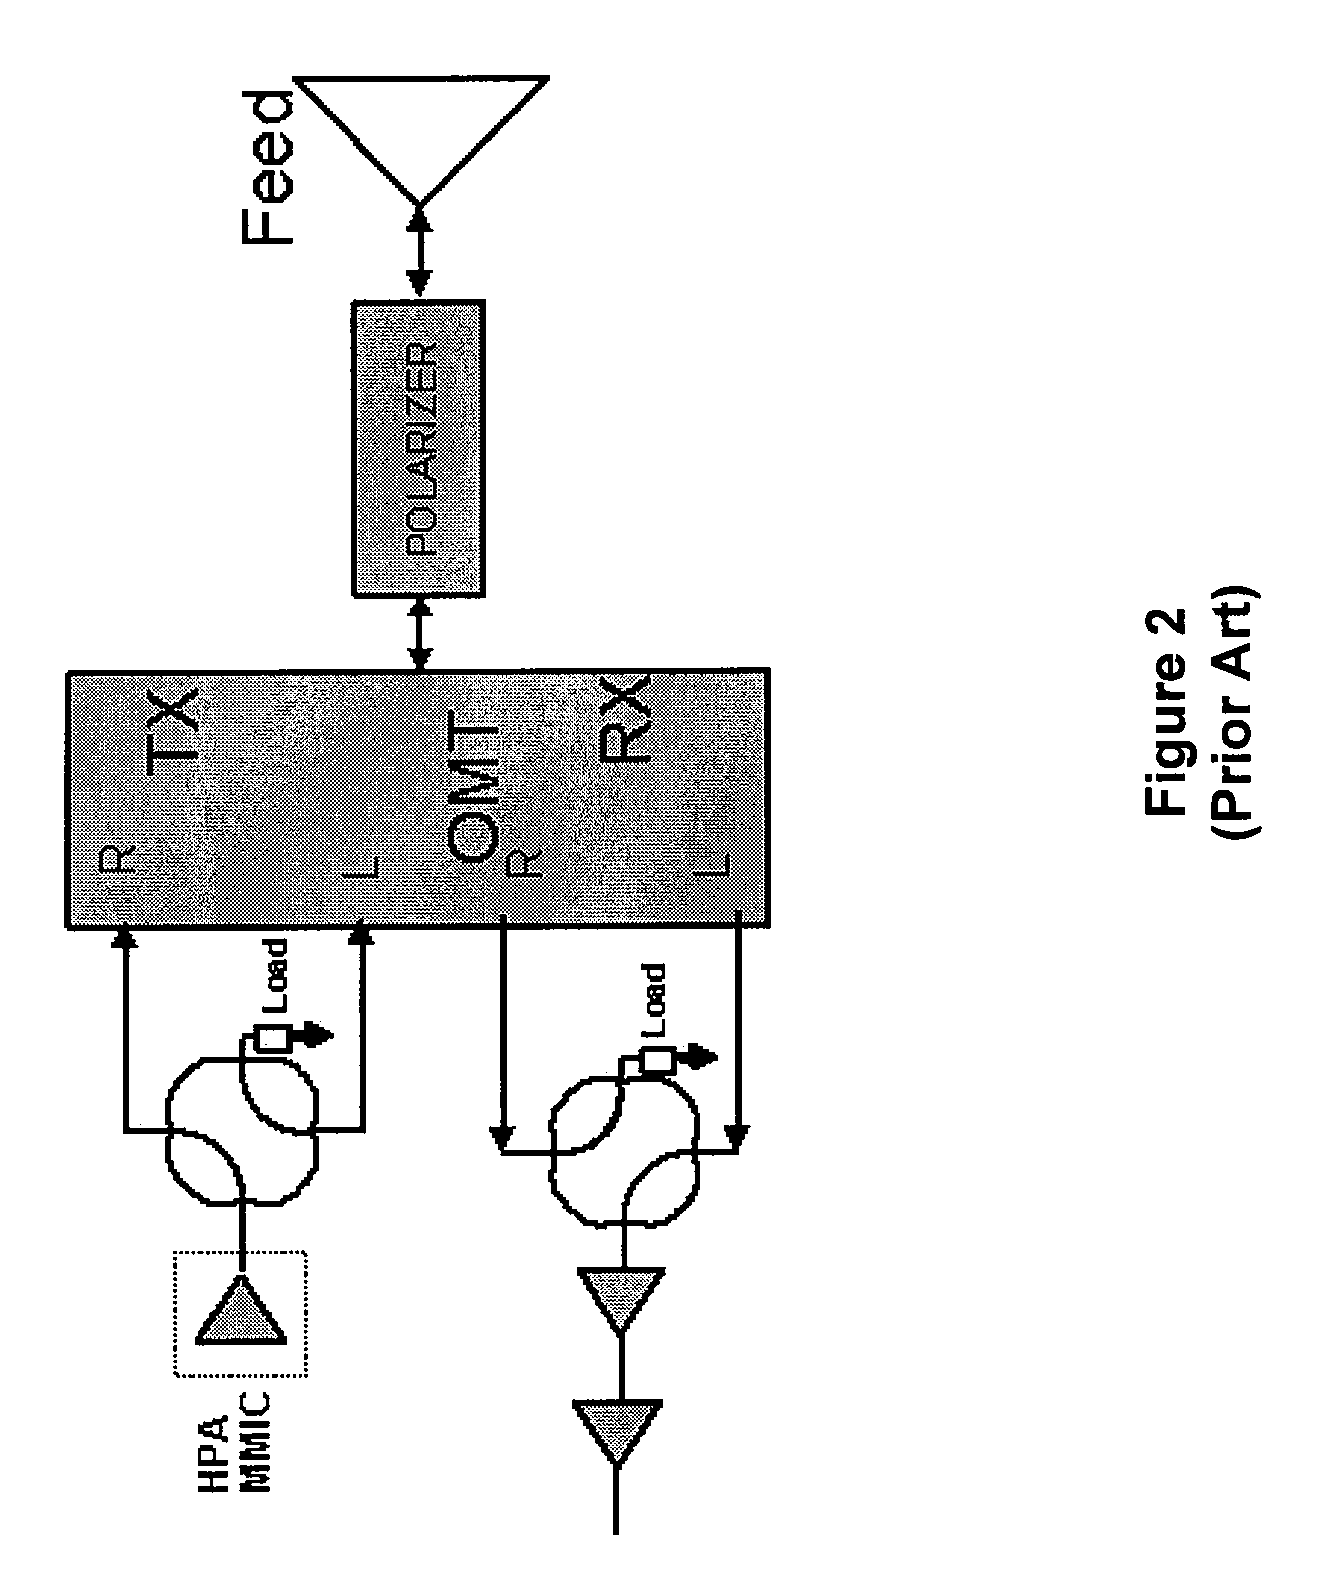 Multi-beam active phased array architecture